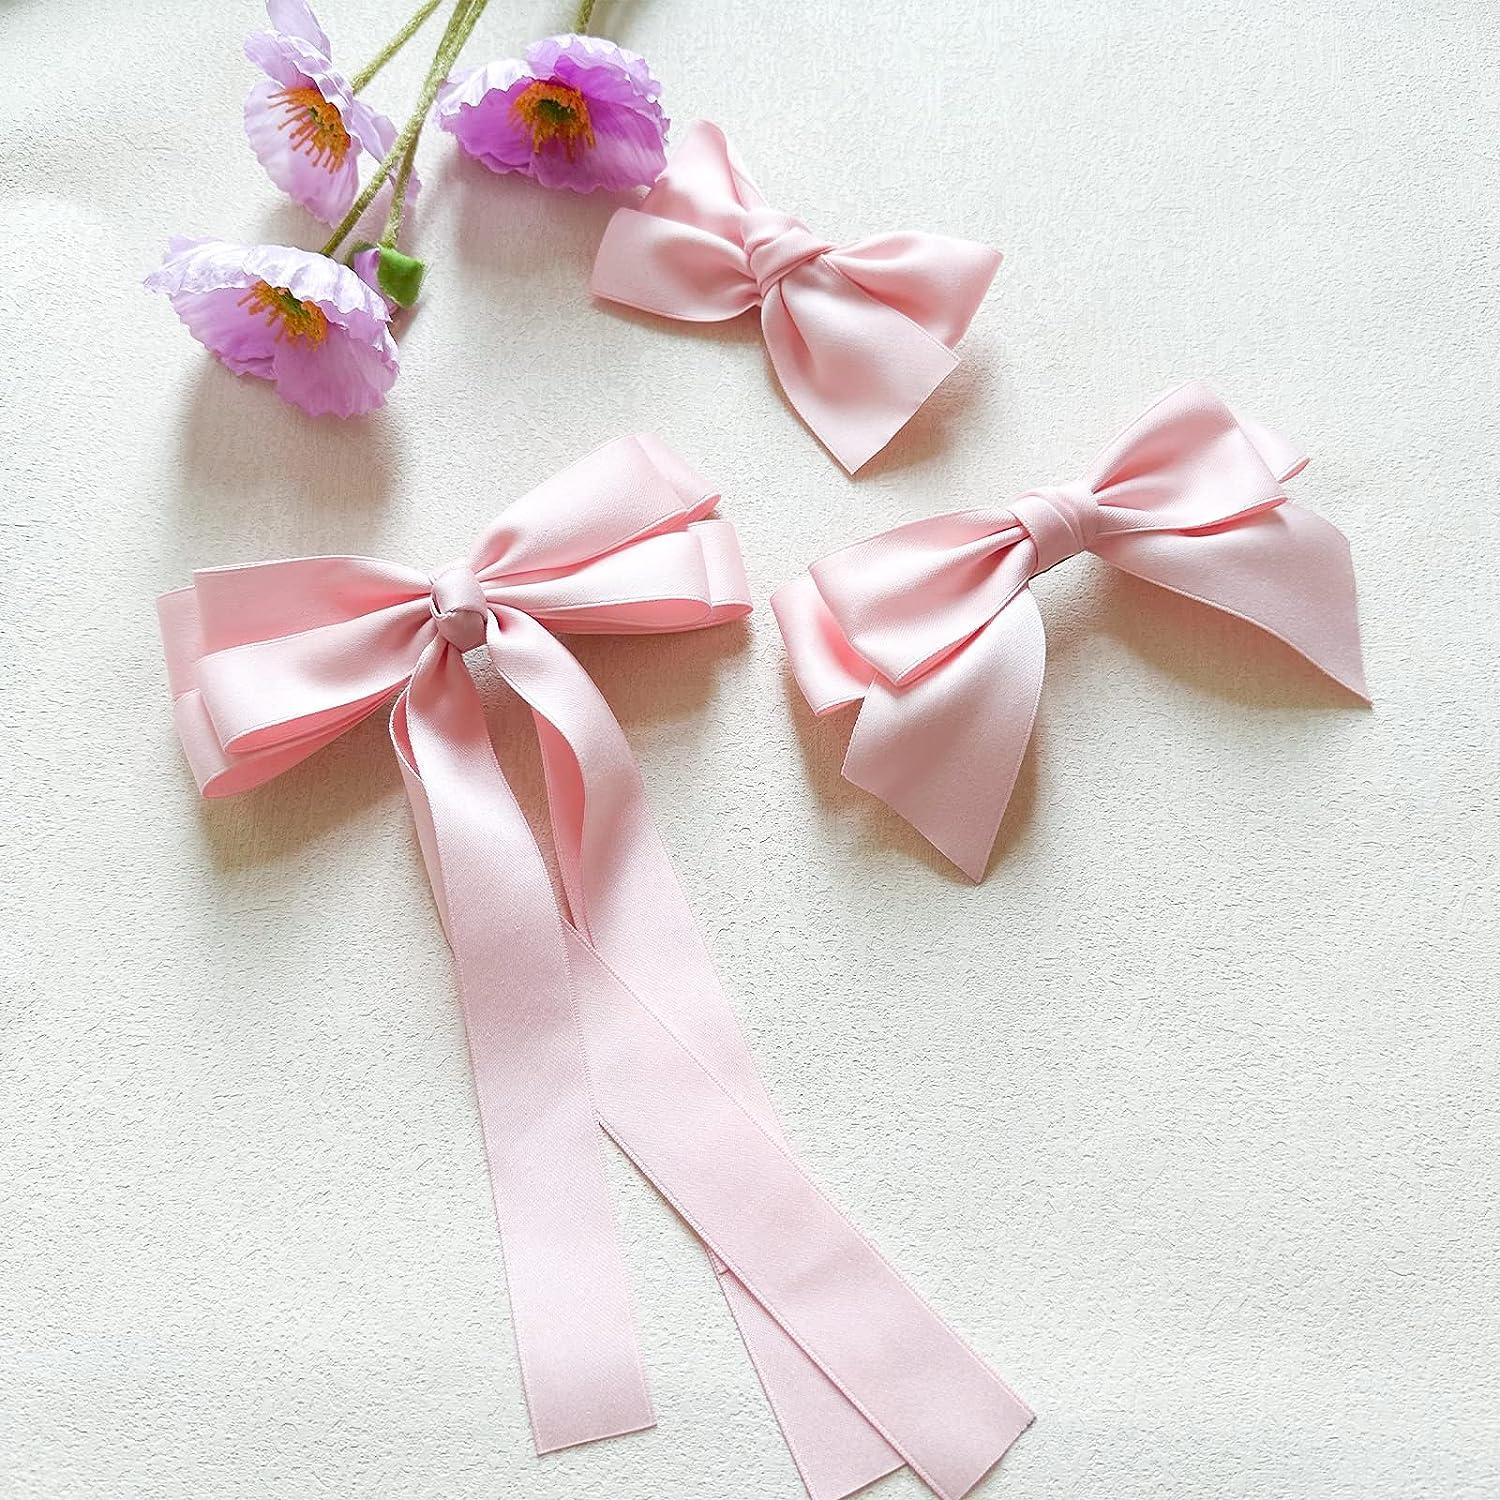 3 Pcs Hair Bows For Women Hair Ribbons For Woman Hair Bows For Girls Pink  Bow